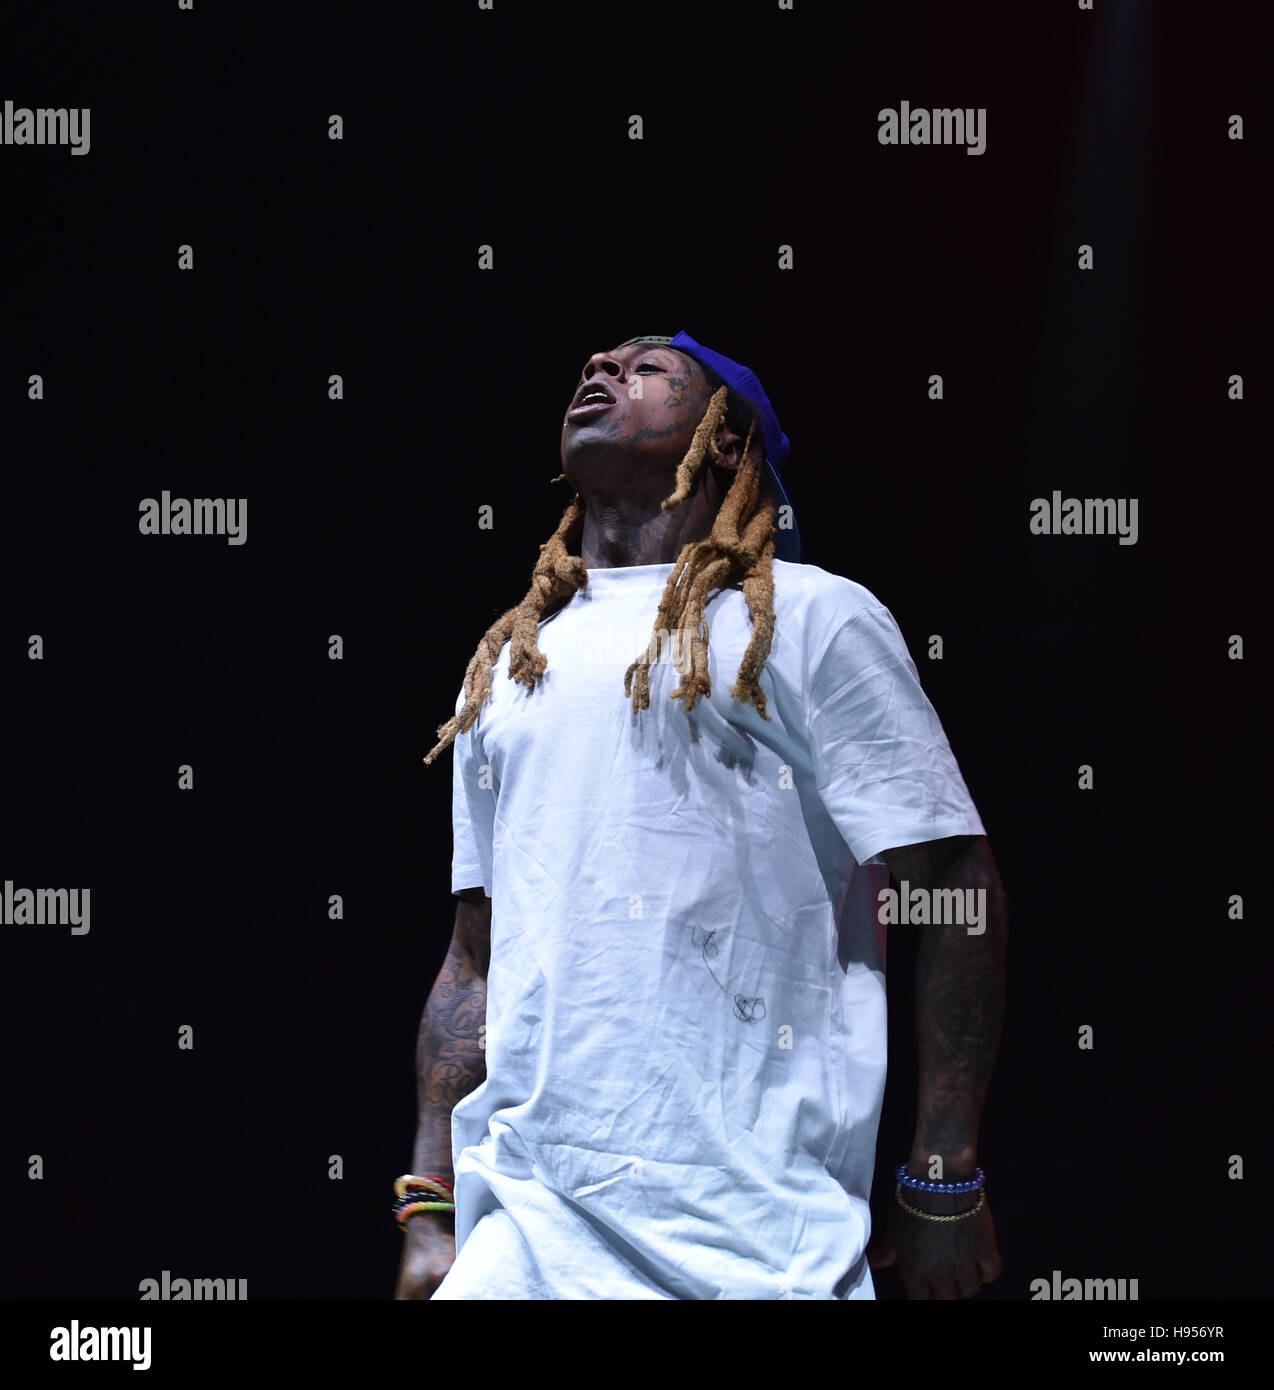 Norfolk, VIRGINIA, USA. 18th Nov, 2016. LIL WAYNE, grammy winner brings the rap to the CONSTANT CENTER at OLD DOMINION UNIVERSITY in NORFOLK, VIRGINIA on 17 OCTOBERL 2016. © Jeff Moore/ZUMA Wire/Alamy Live News Stock Photo